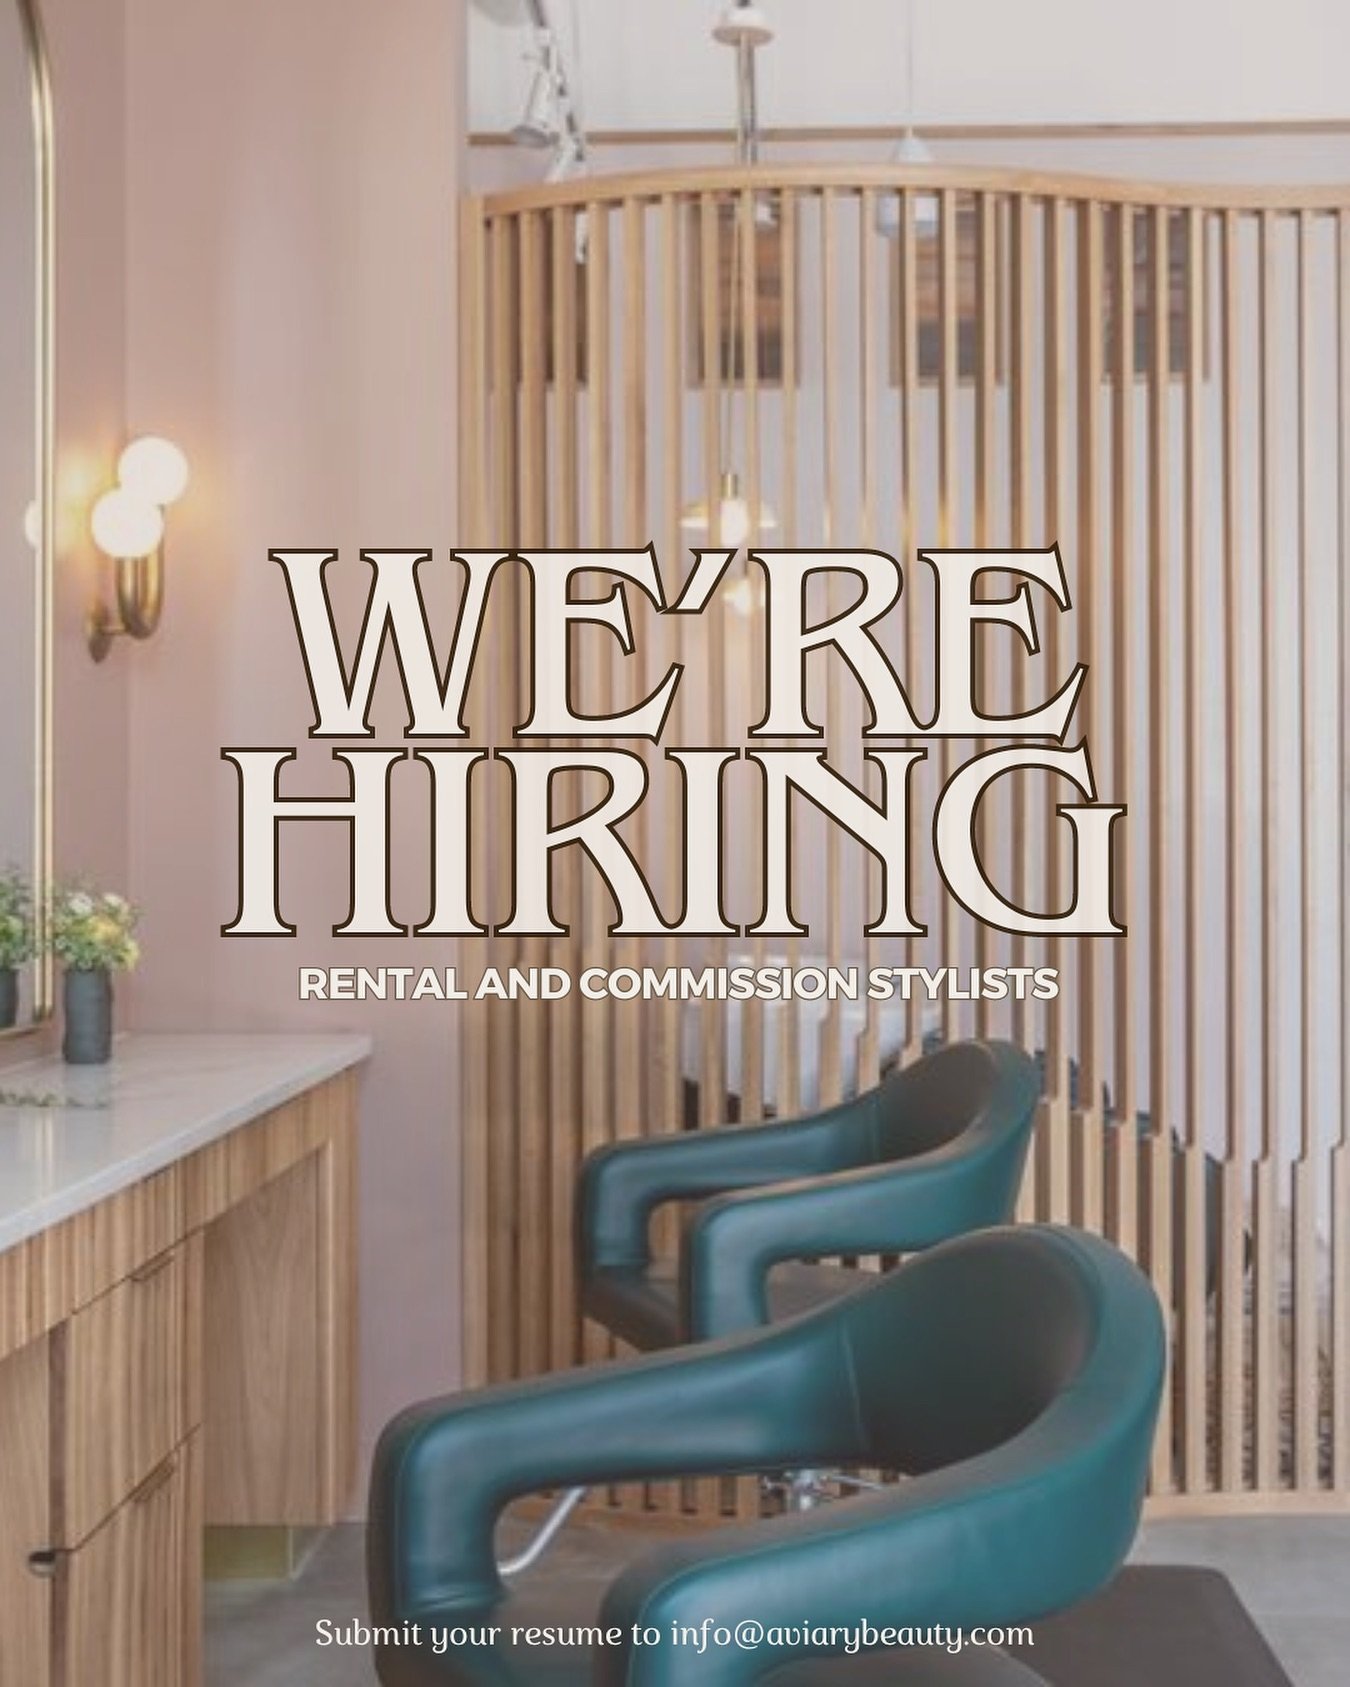 Our flock is moving, shifting, and expanding 🕊️ and we&rsquo;re looking to add more stylists to our team!

The perks?

✨Full time front desk support
✨Competitive commission and weekly rental rates
✨ Backbar and retail provided (R + Co and Virtue Lab